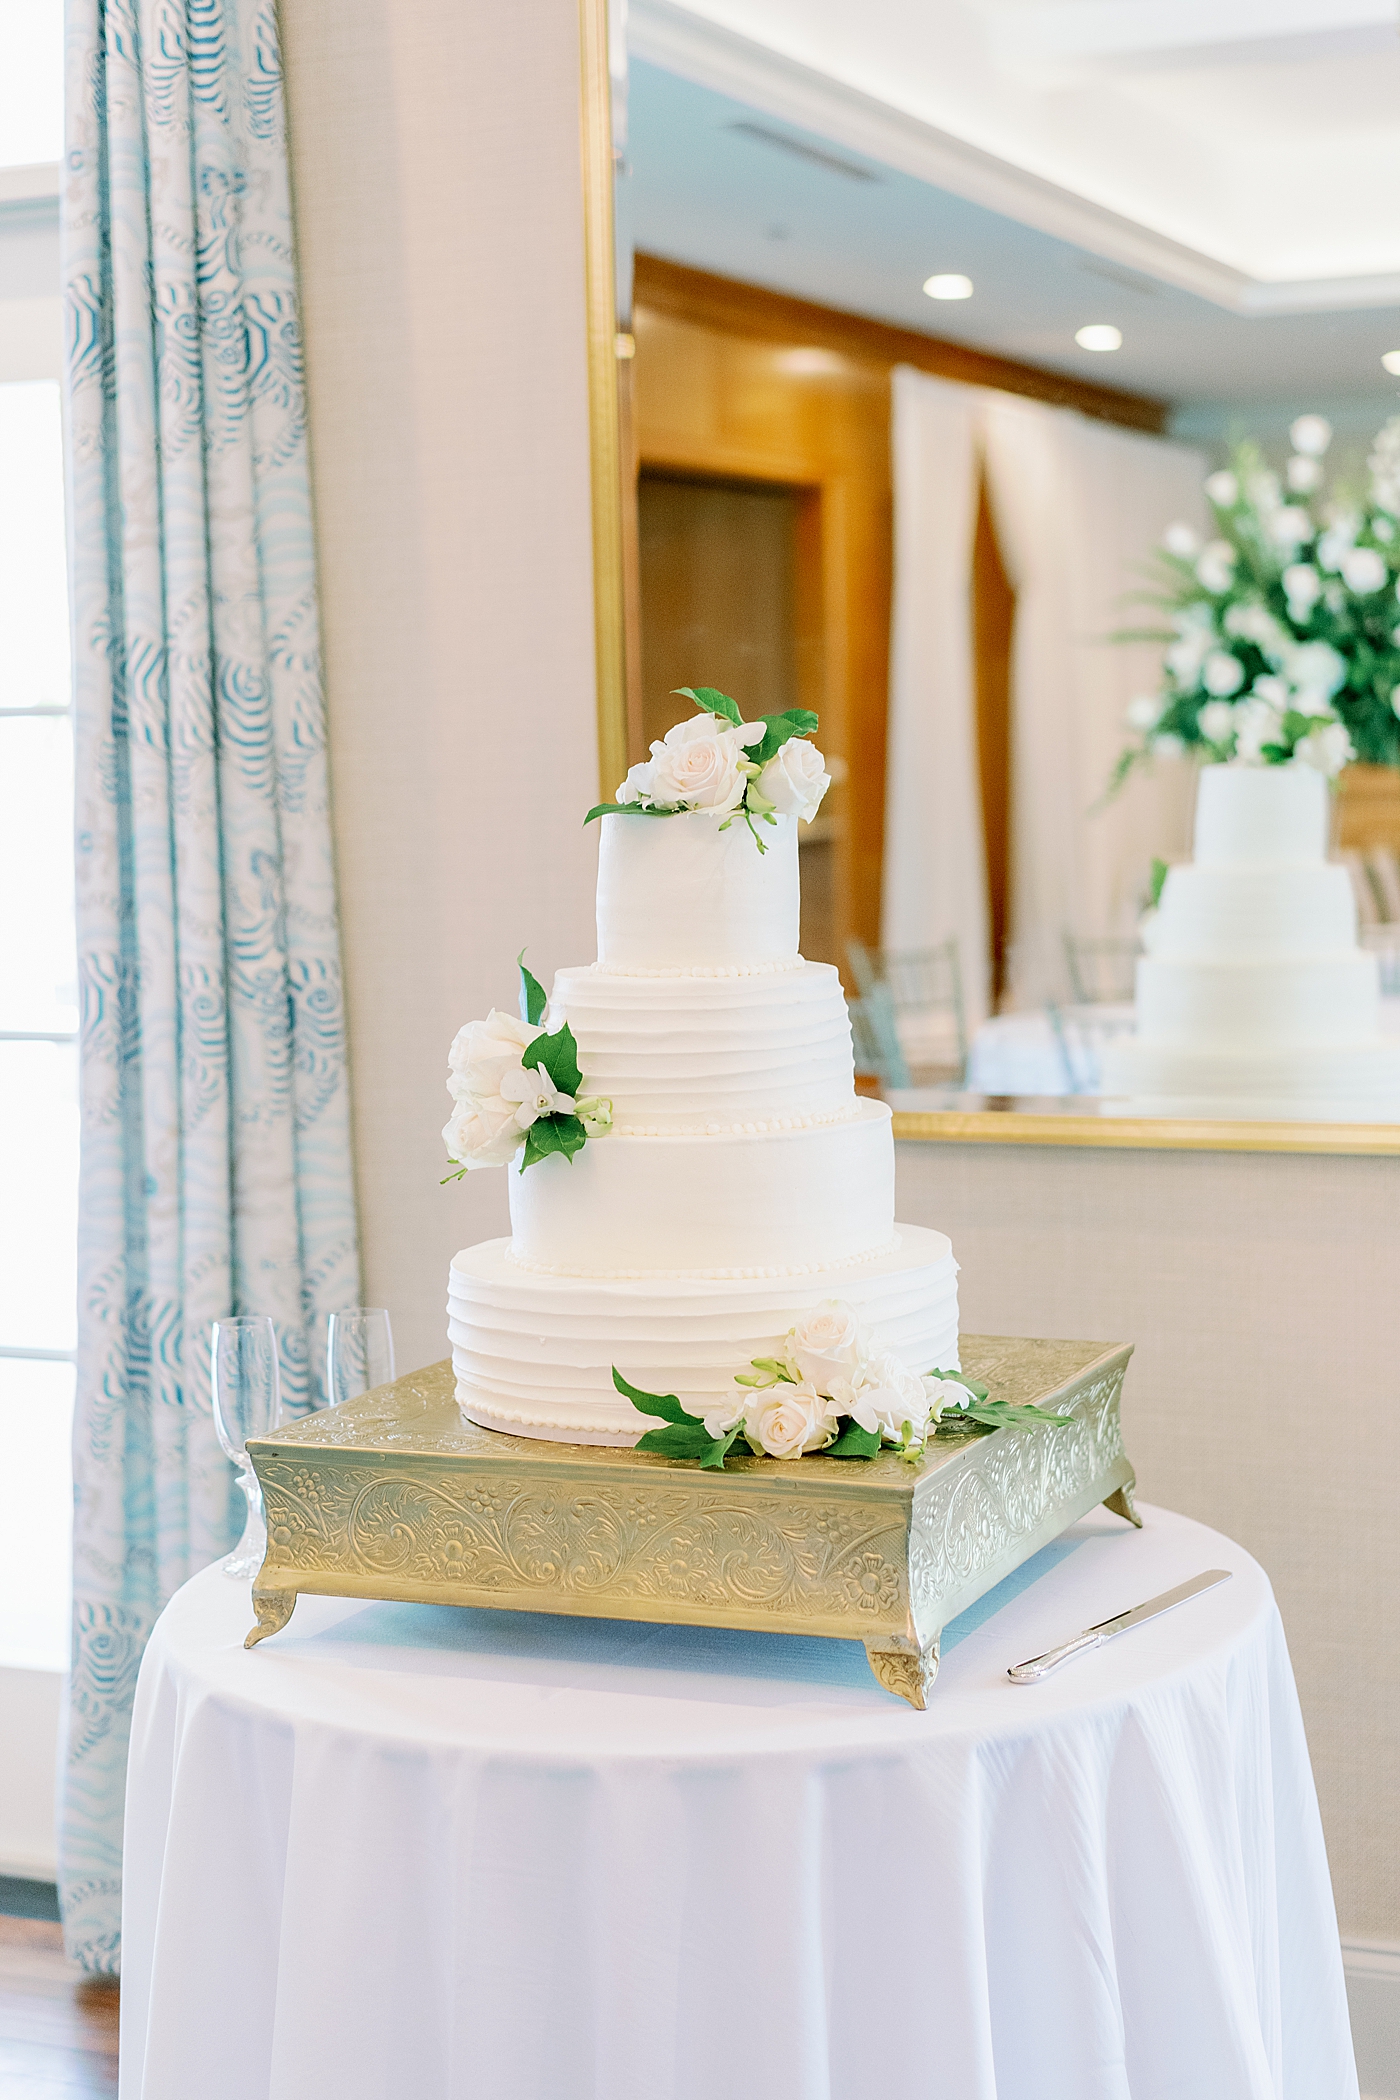 White wedding cake with white flowers | Image by Annie Laura Photo